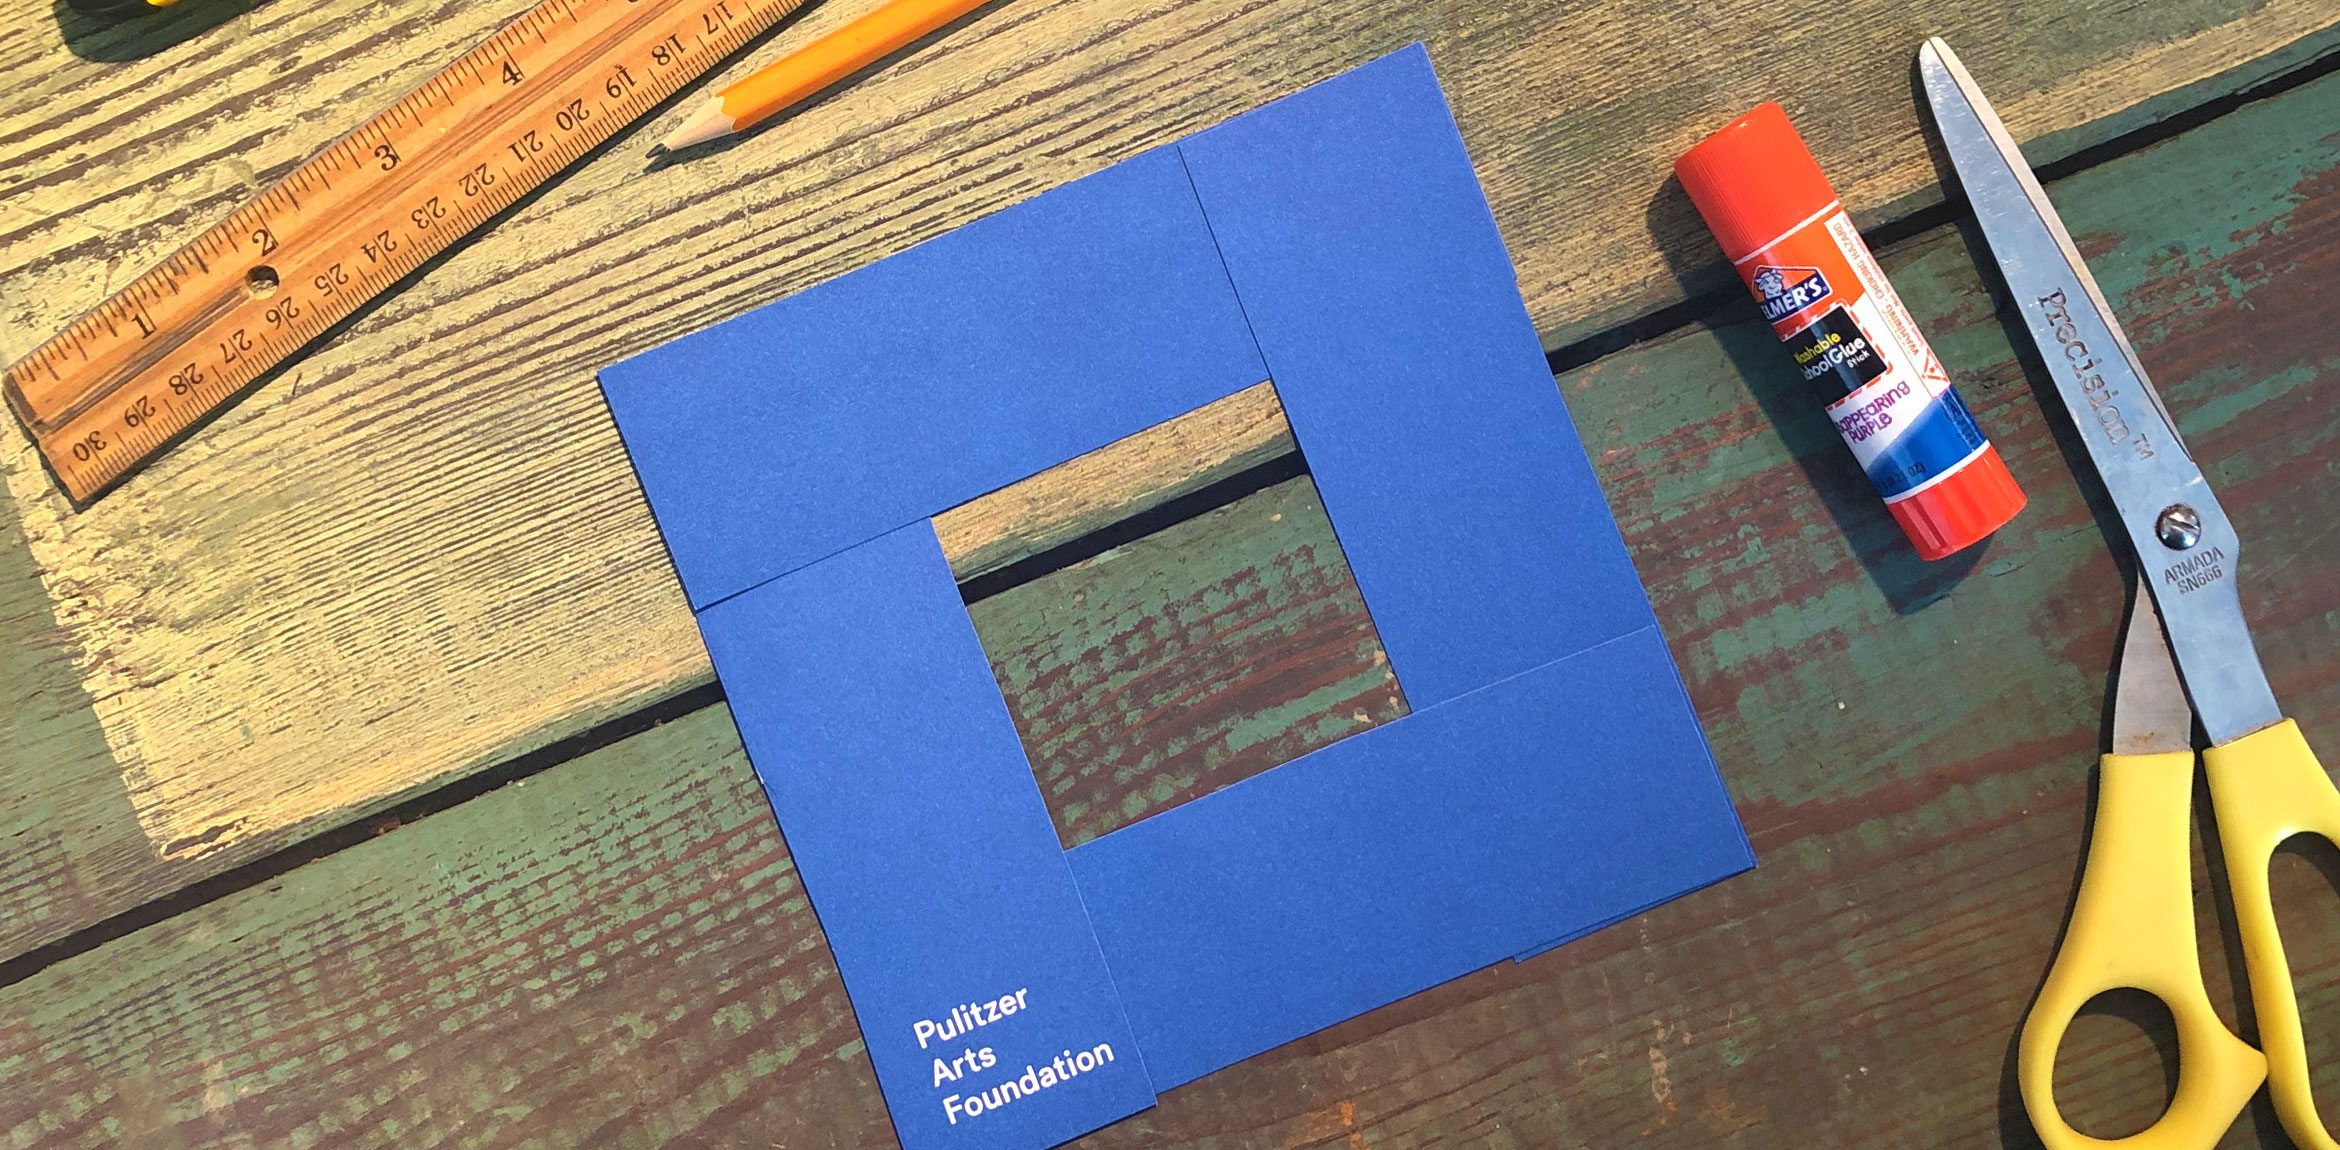 A handmade square viewfinder, made with a blue Pulitzer catalogue, on a wooden surface surrounded by tools.